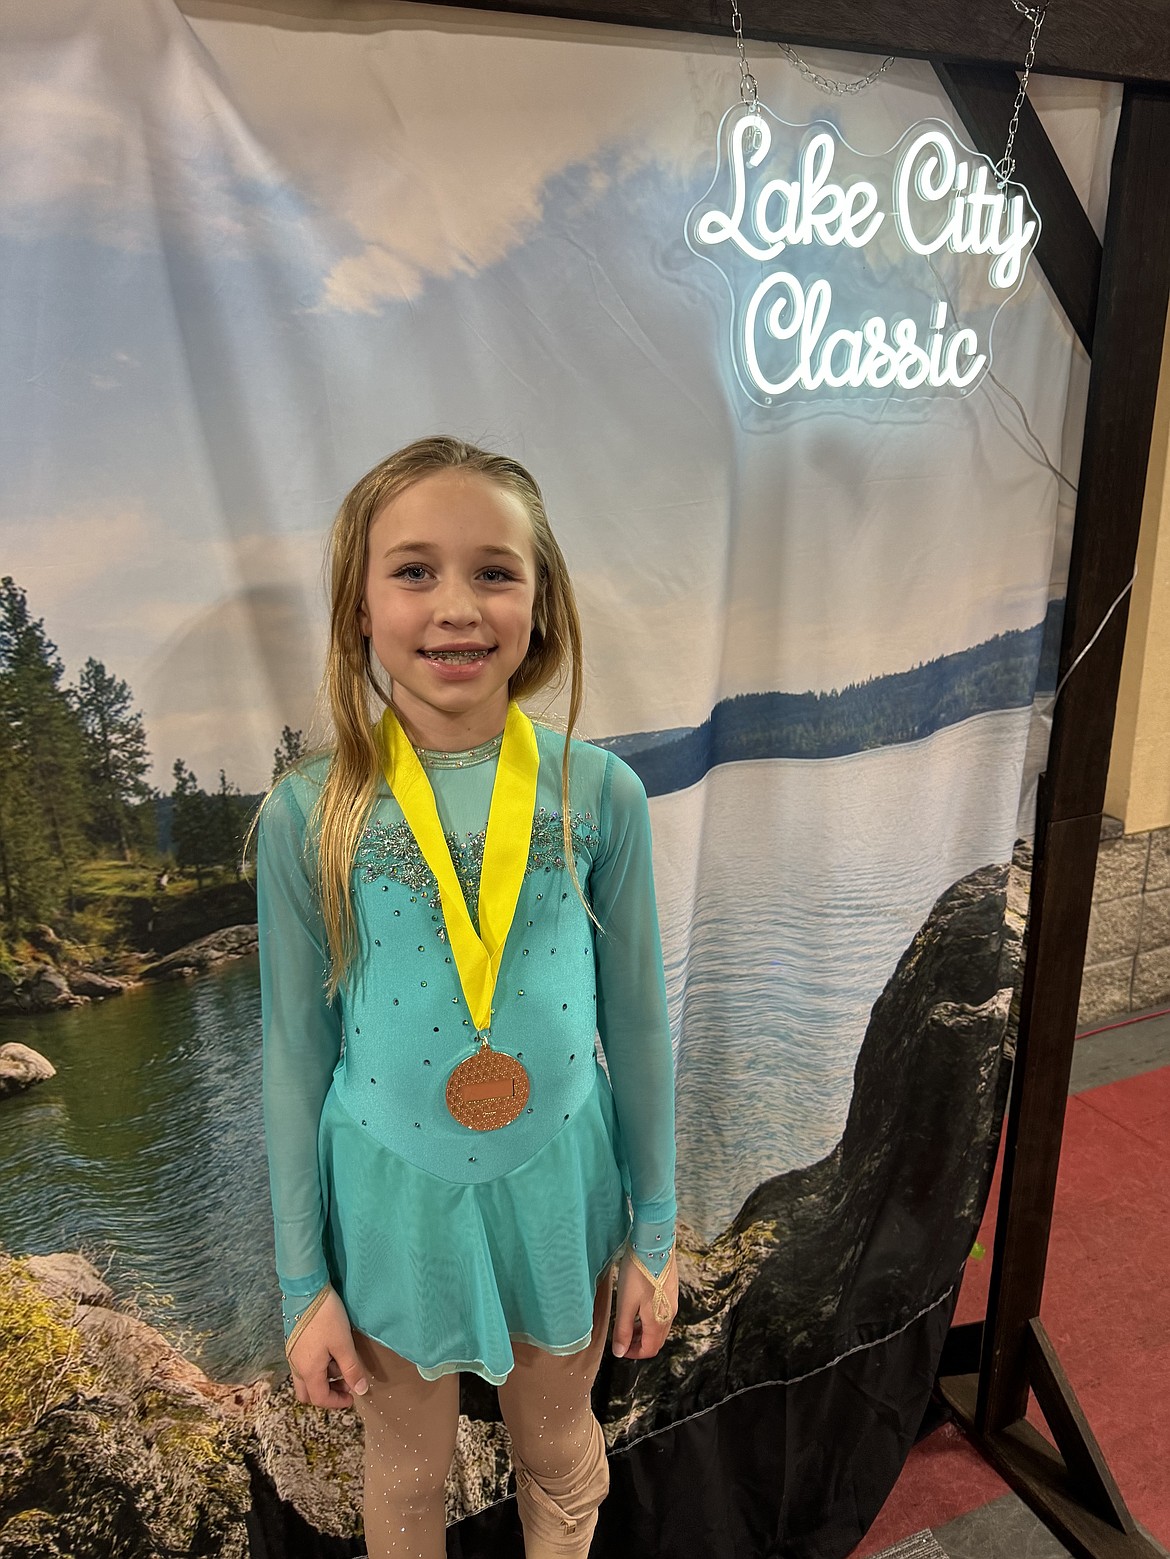 Courtesy photo 
Claire Graybeal, part of the Lake City Figure Skating program of the Spokane Figure Skating Club, which hosted the Lake City Classic on May 17-19 at the Frontier Ice Arena in Coeur d'Alene.